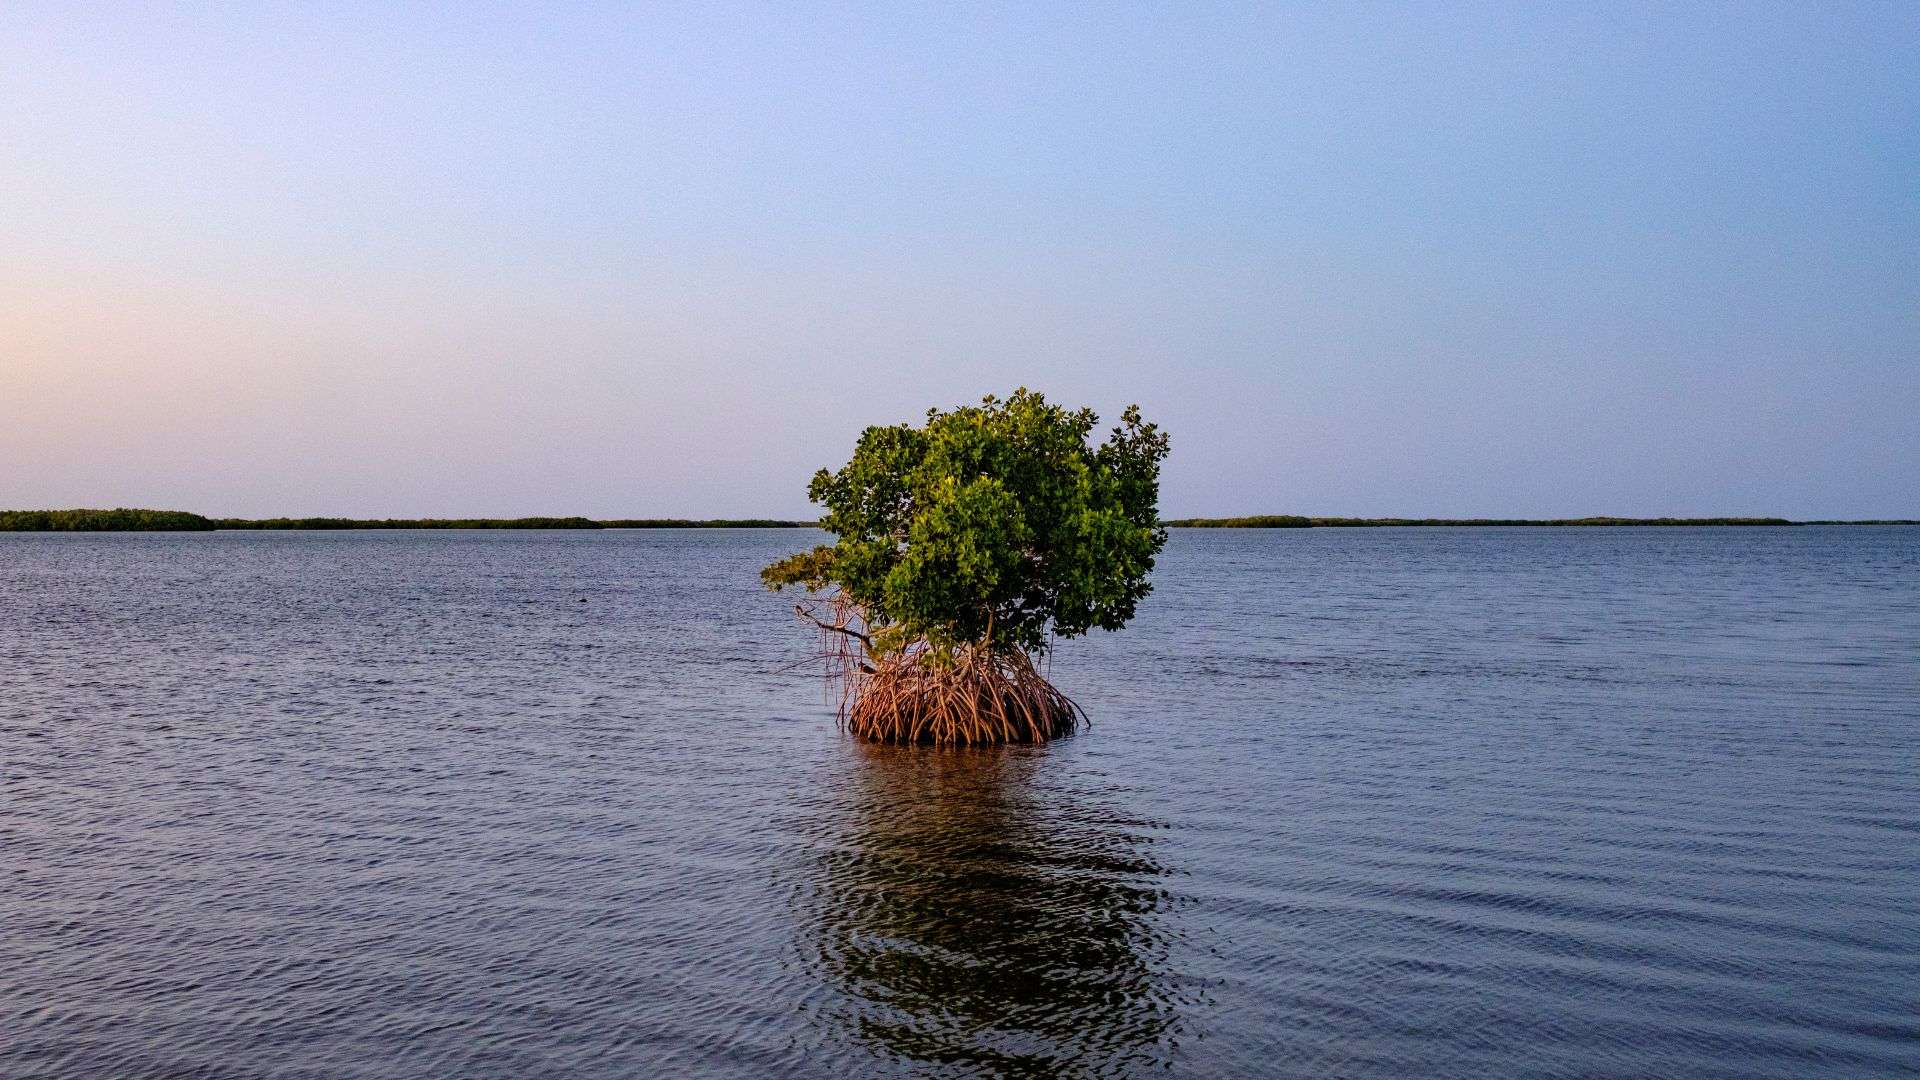 A lone mangrove tree in San Felipe, Yucatan, Mexico. From a monitoring, evaluation, and learning (MEL) trip focused on mangrove conservation in Yucatan, Mexico.